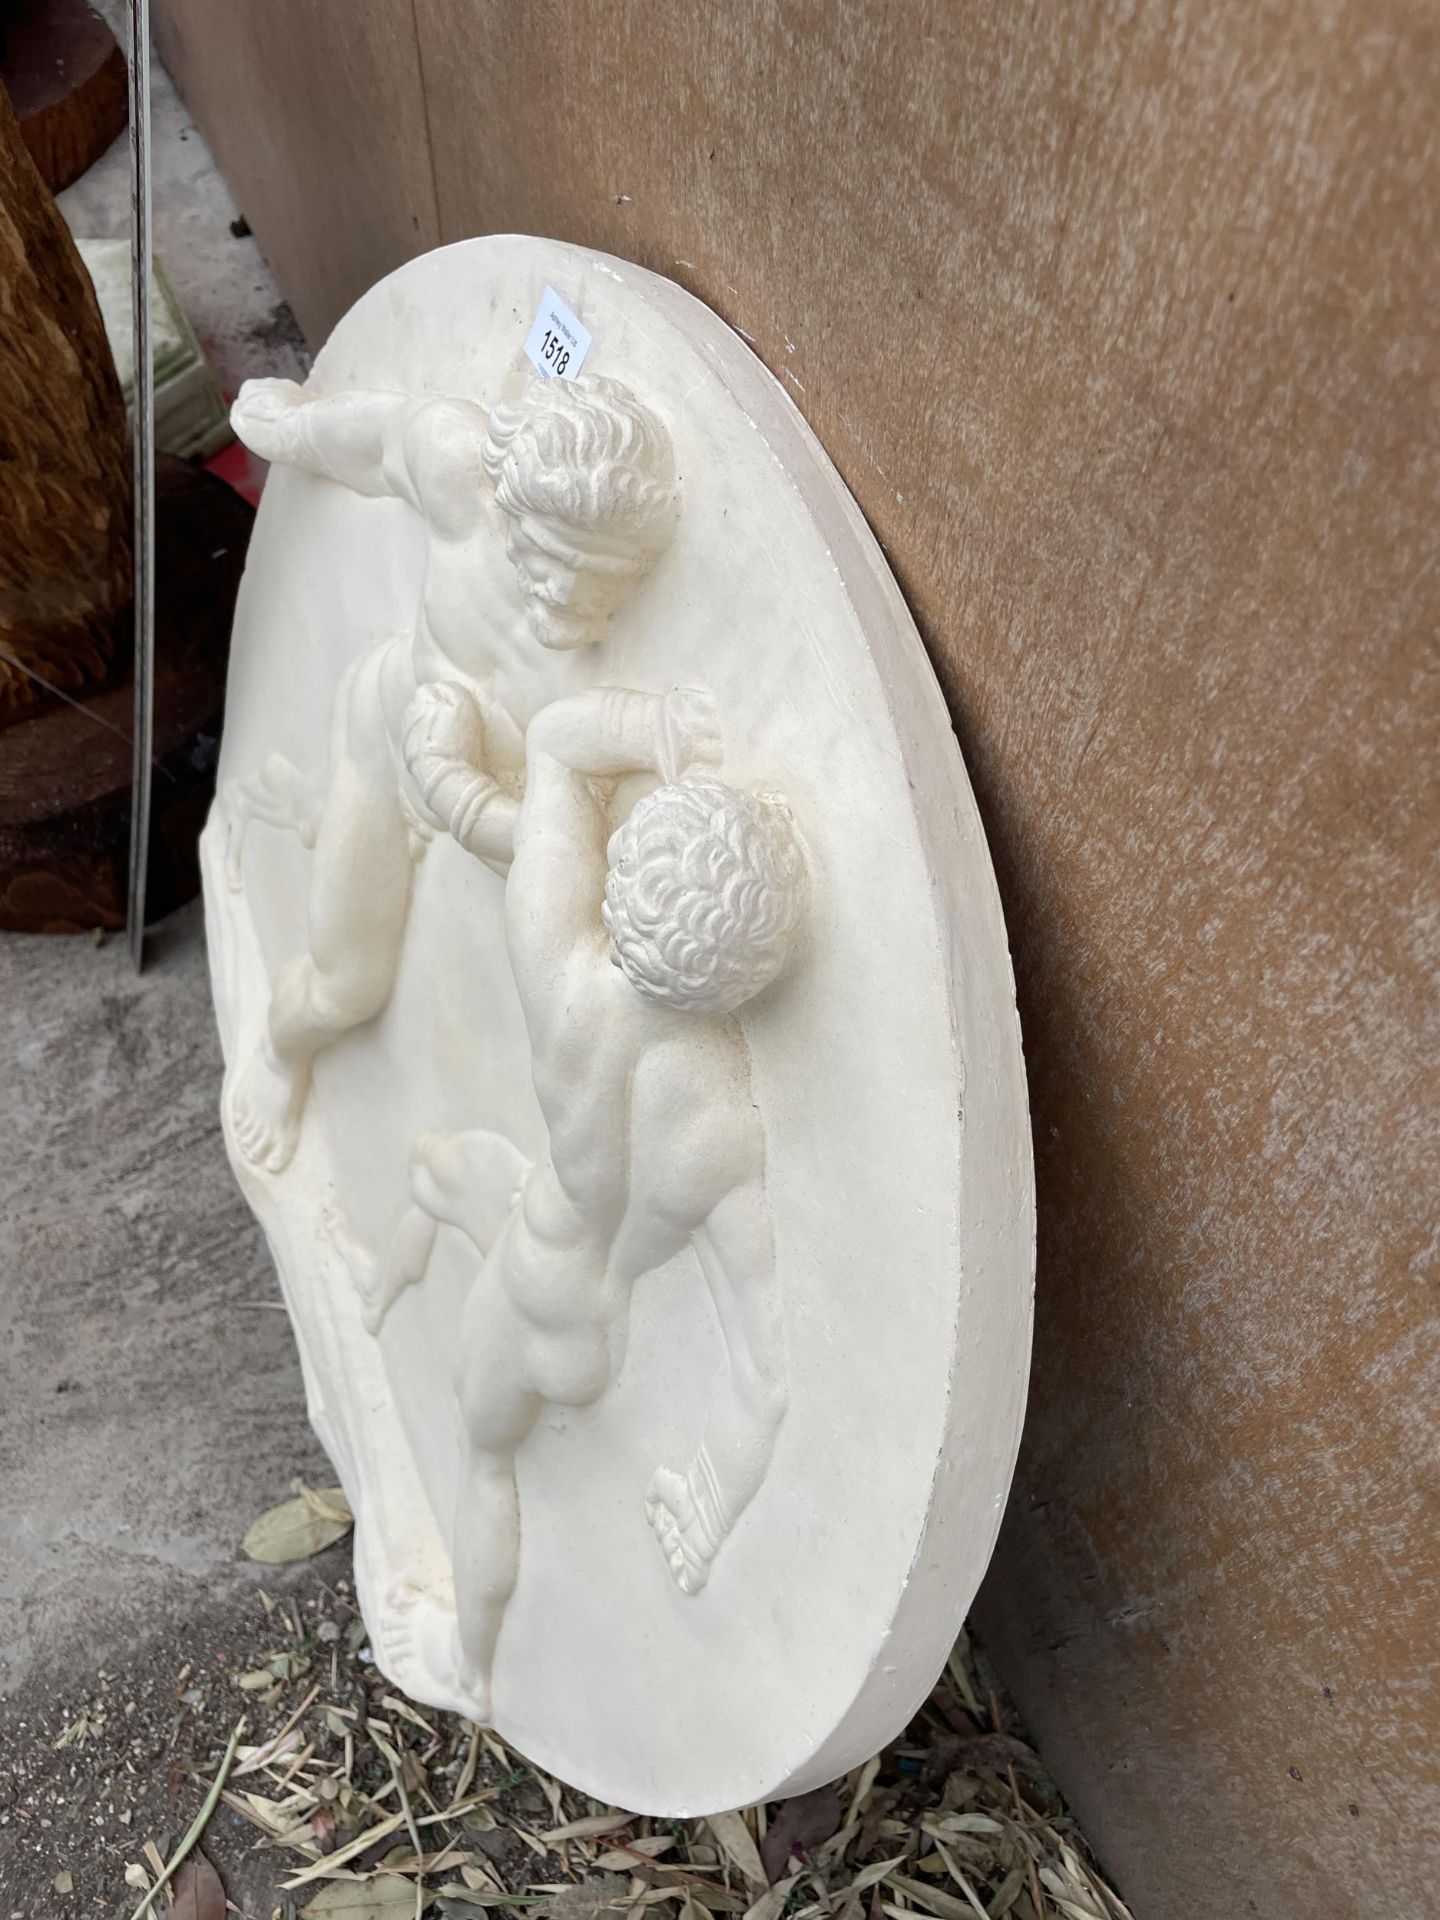 A PLASTER CAST WALL PLAQUE WITH A CHERUB DESIGN - Image 3 of 4